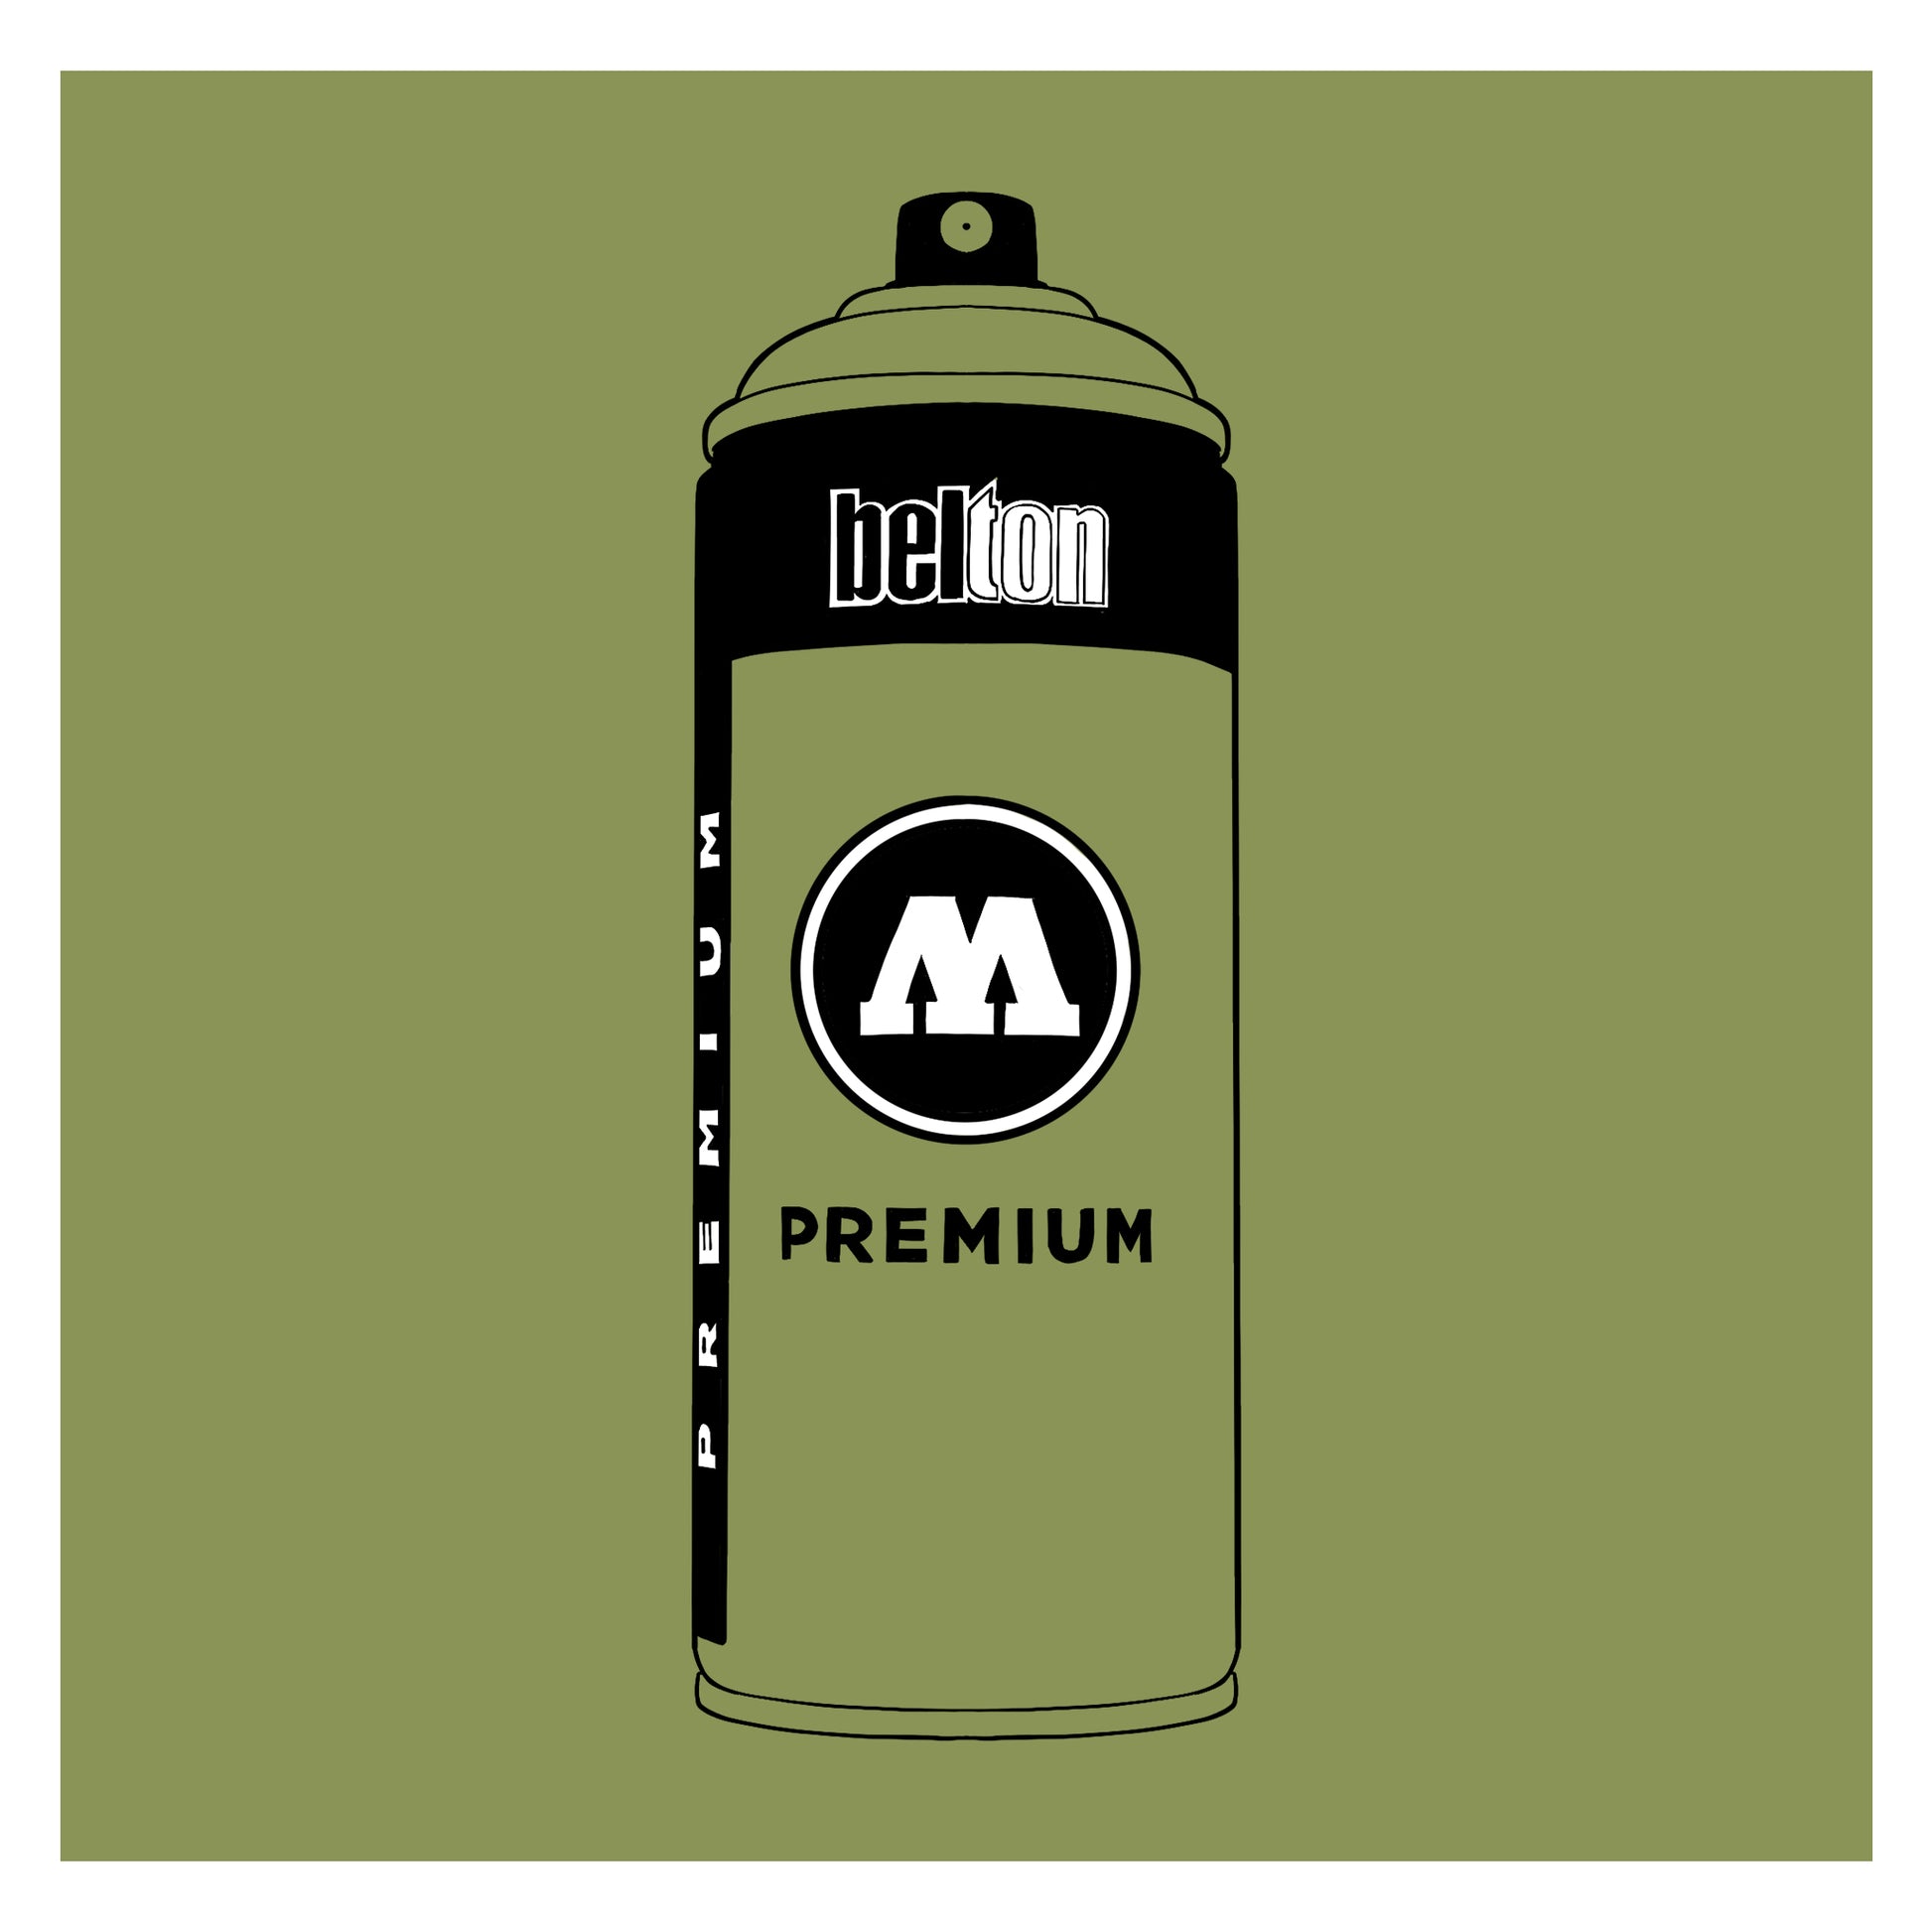 A black outline drawing of a pastel olive green spray paint can with the words "belton","premium" and the letter"M" written on the face in black and white font. The background is a color swatch of the same olive green with a white border